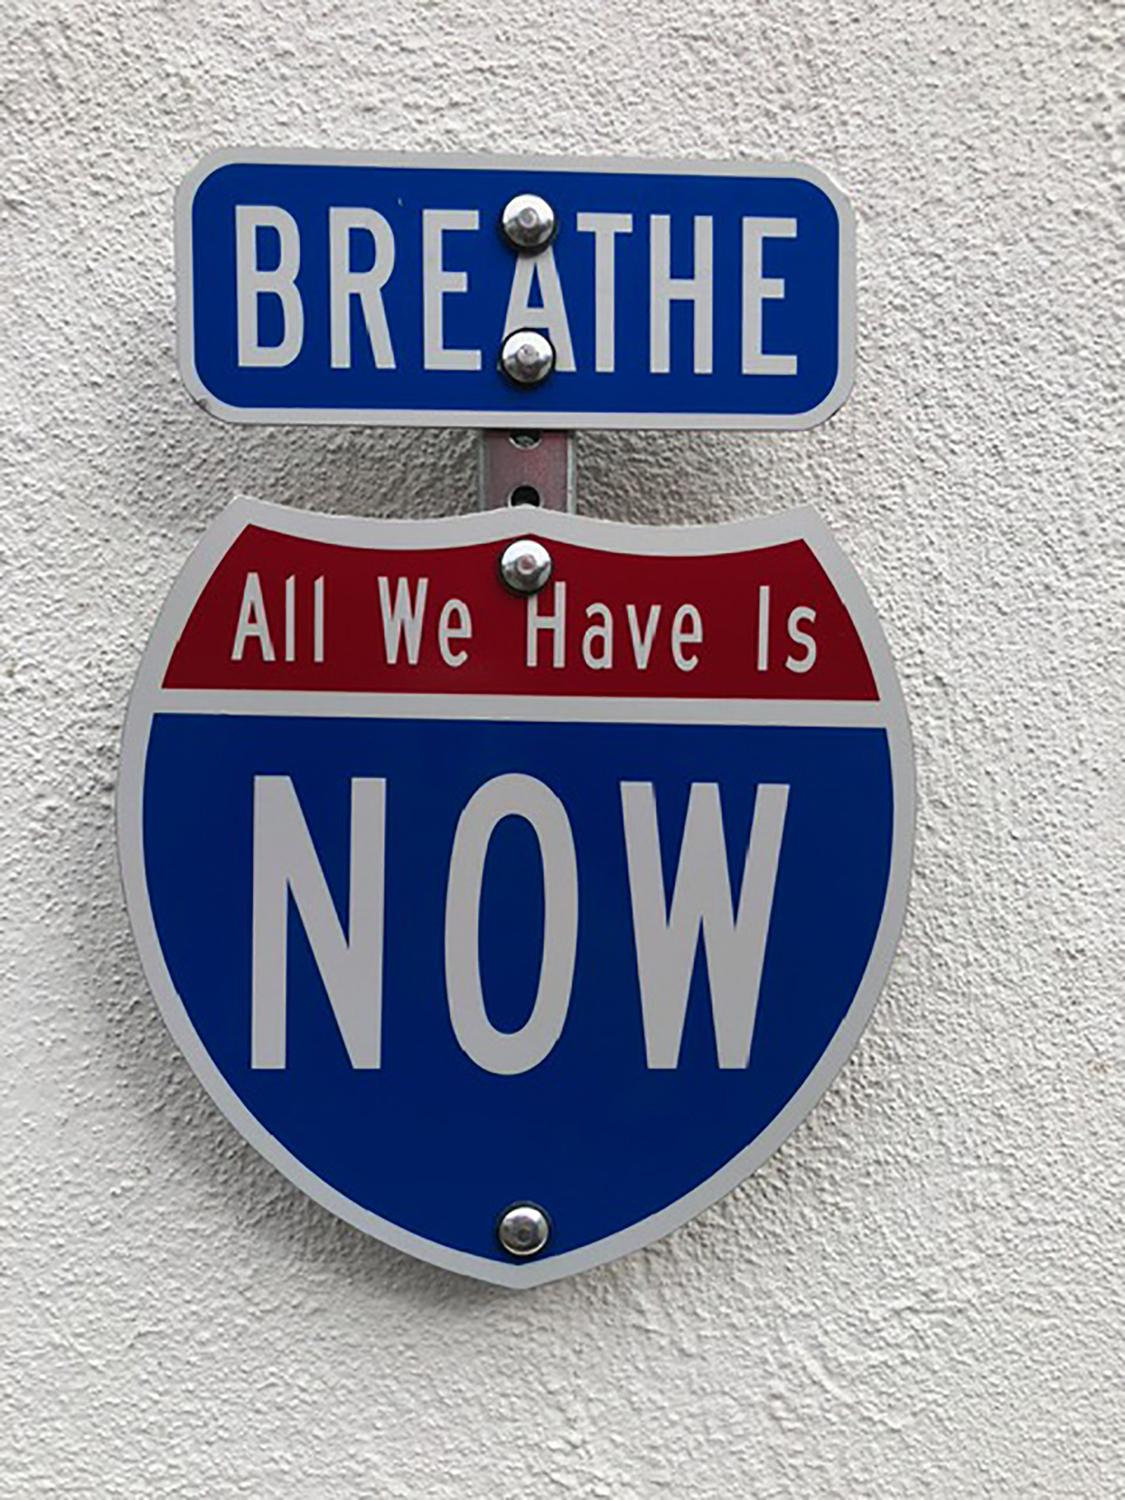 "Breathe All We Have Is Now" - Contemporary Street Sign Sculpture - Mixed Media Art by Scott Froschauer